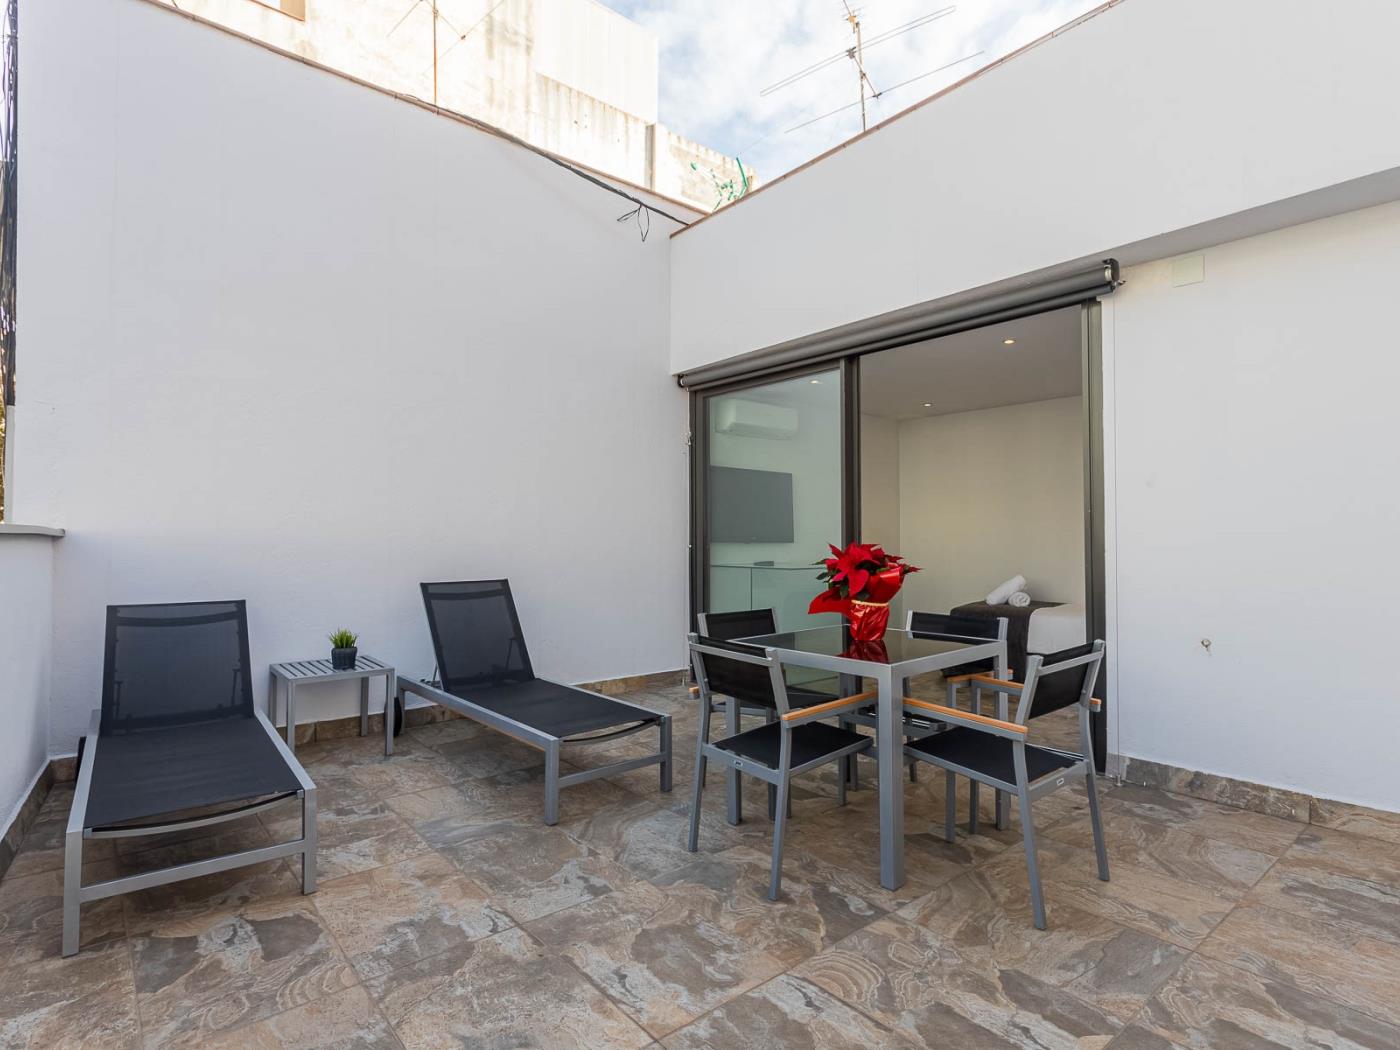 Lovely apartment with big private terrace in Sant Gervasy for monthly rentals - My Space Barcelona Apartments